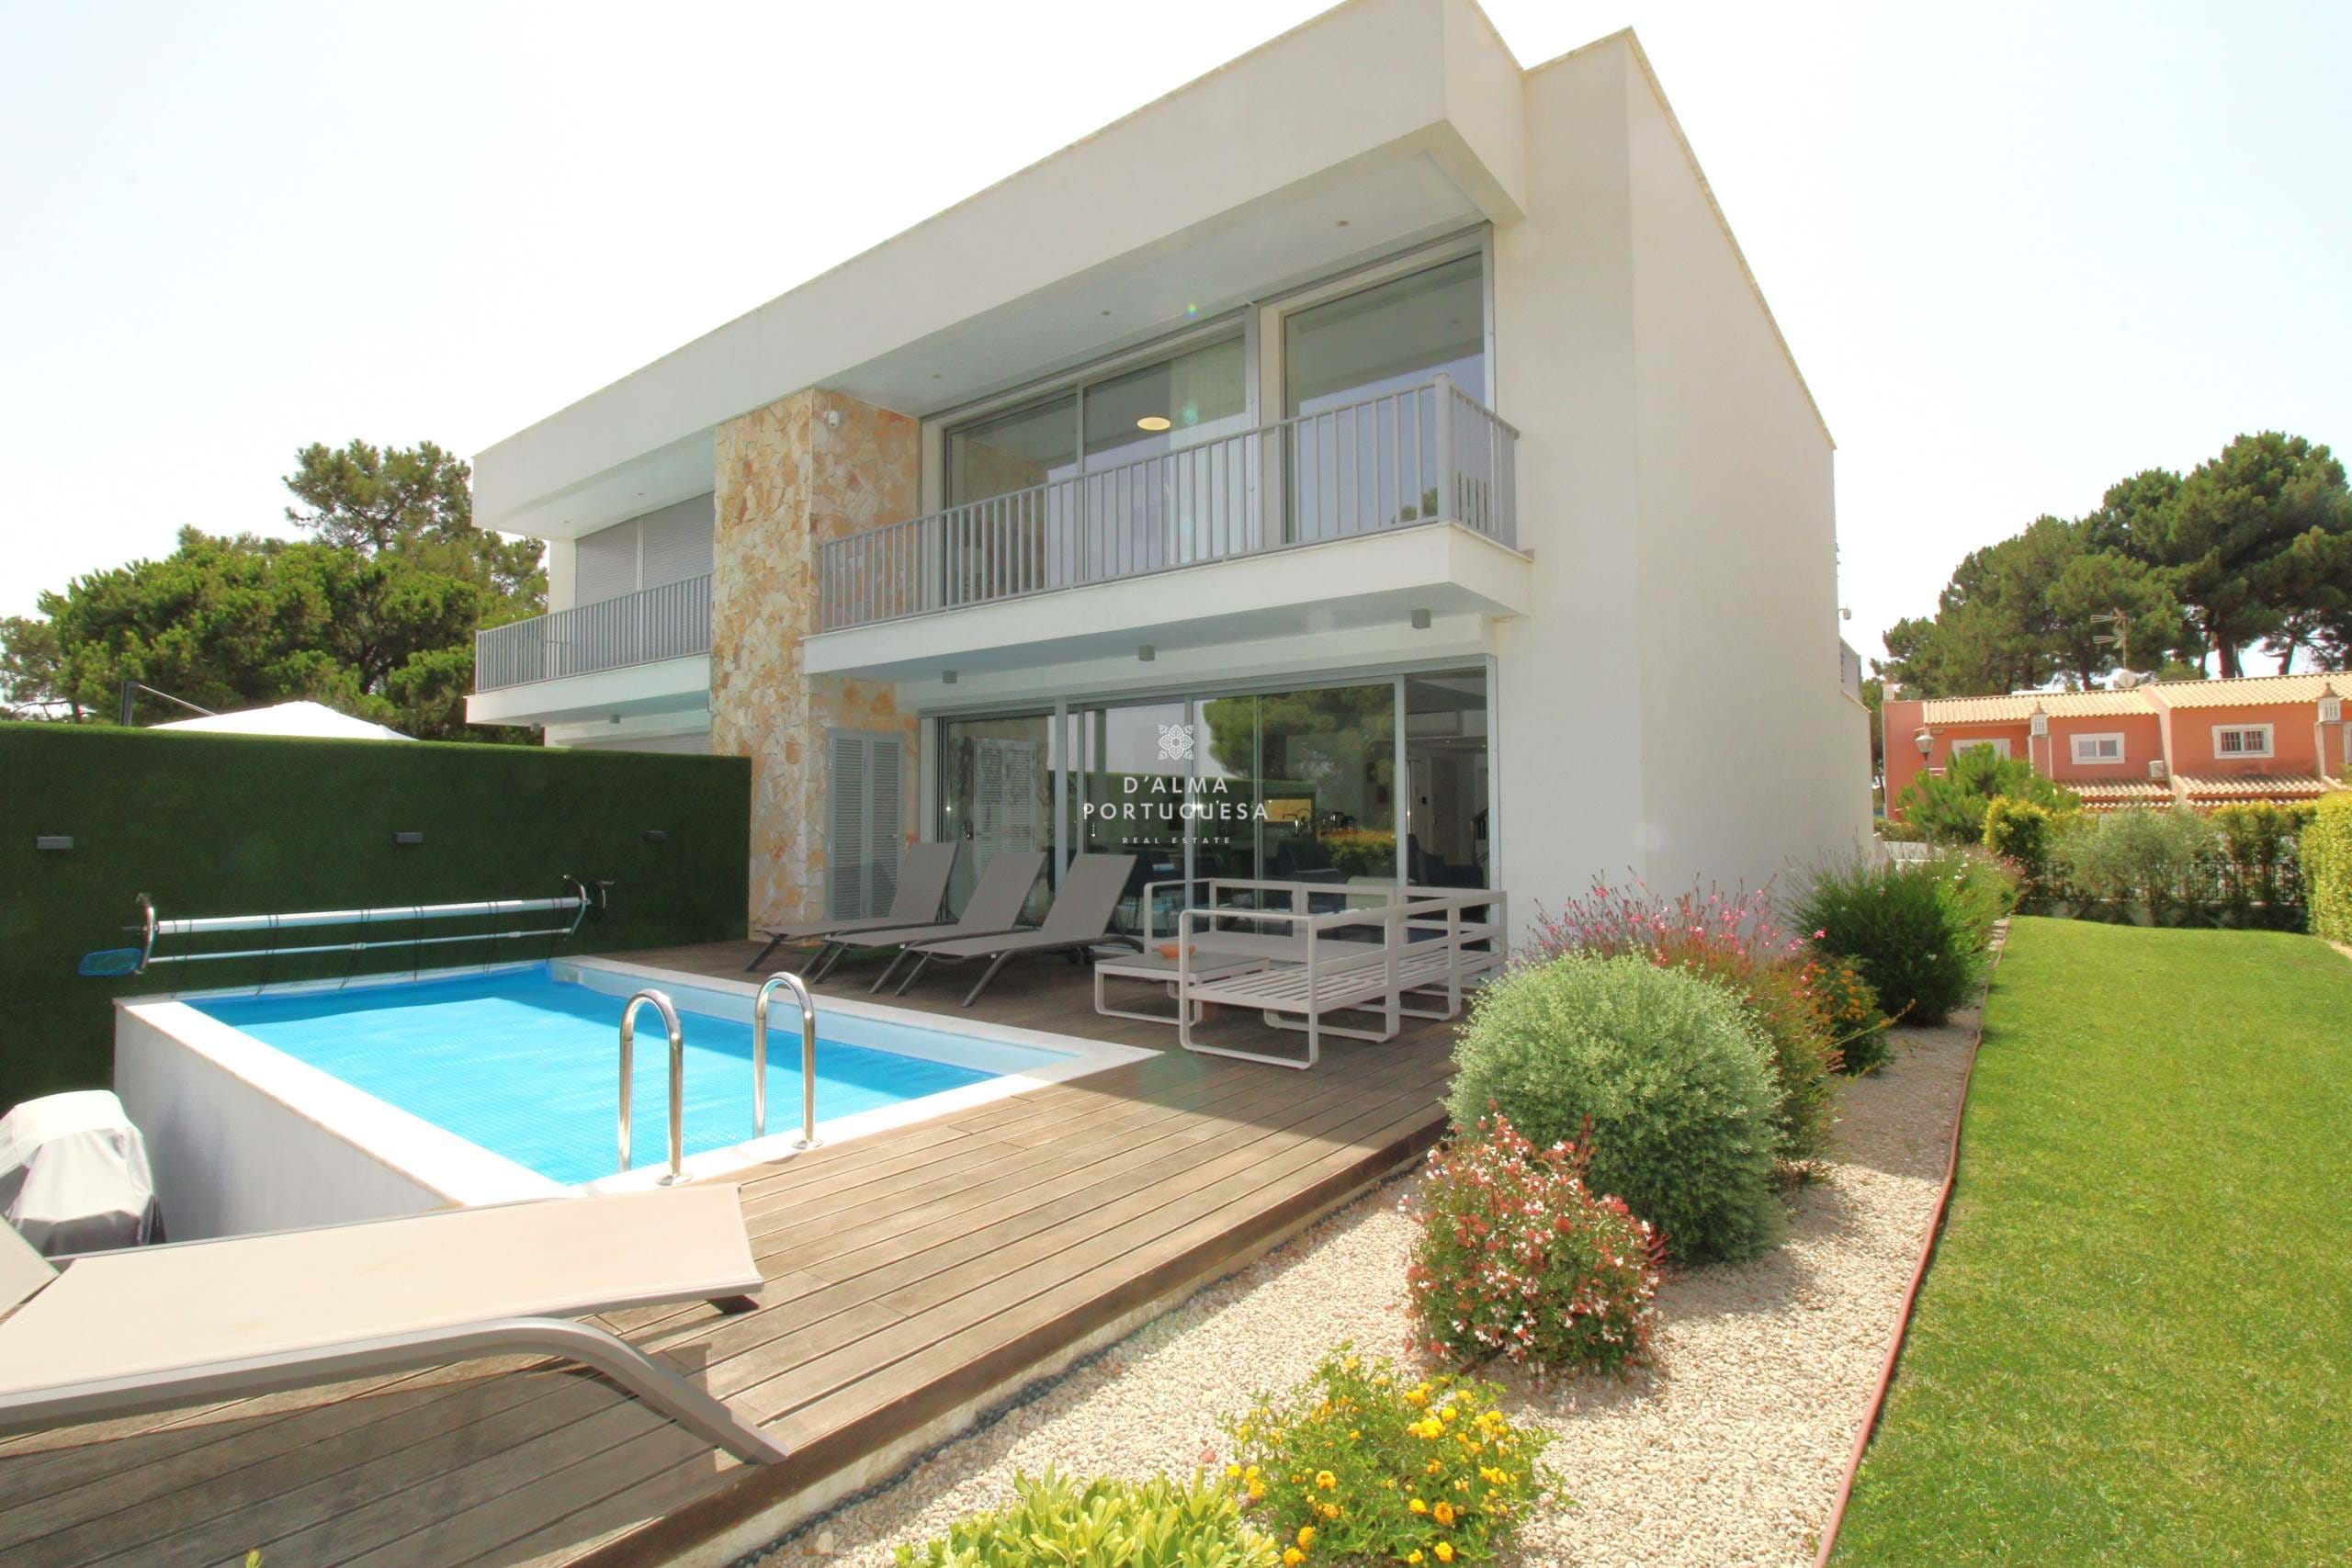 independent villa,3 bedrooms villa,private pool,garage,quiet area,near of the center,near of the beach